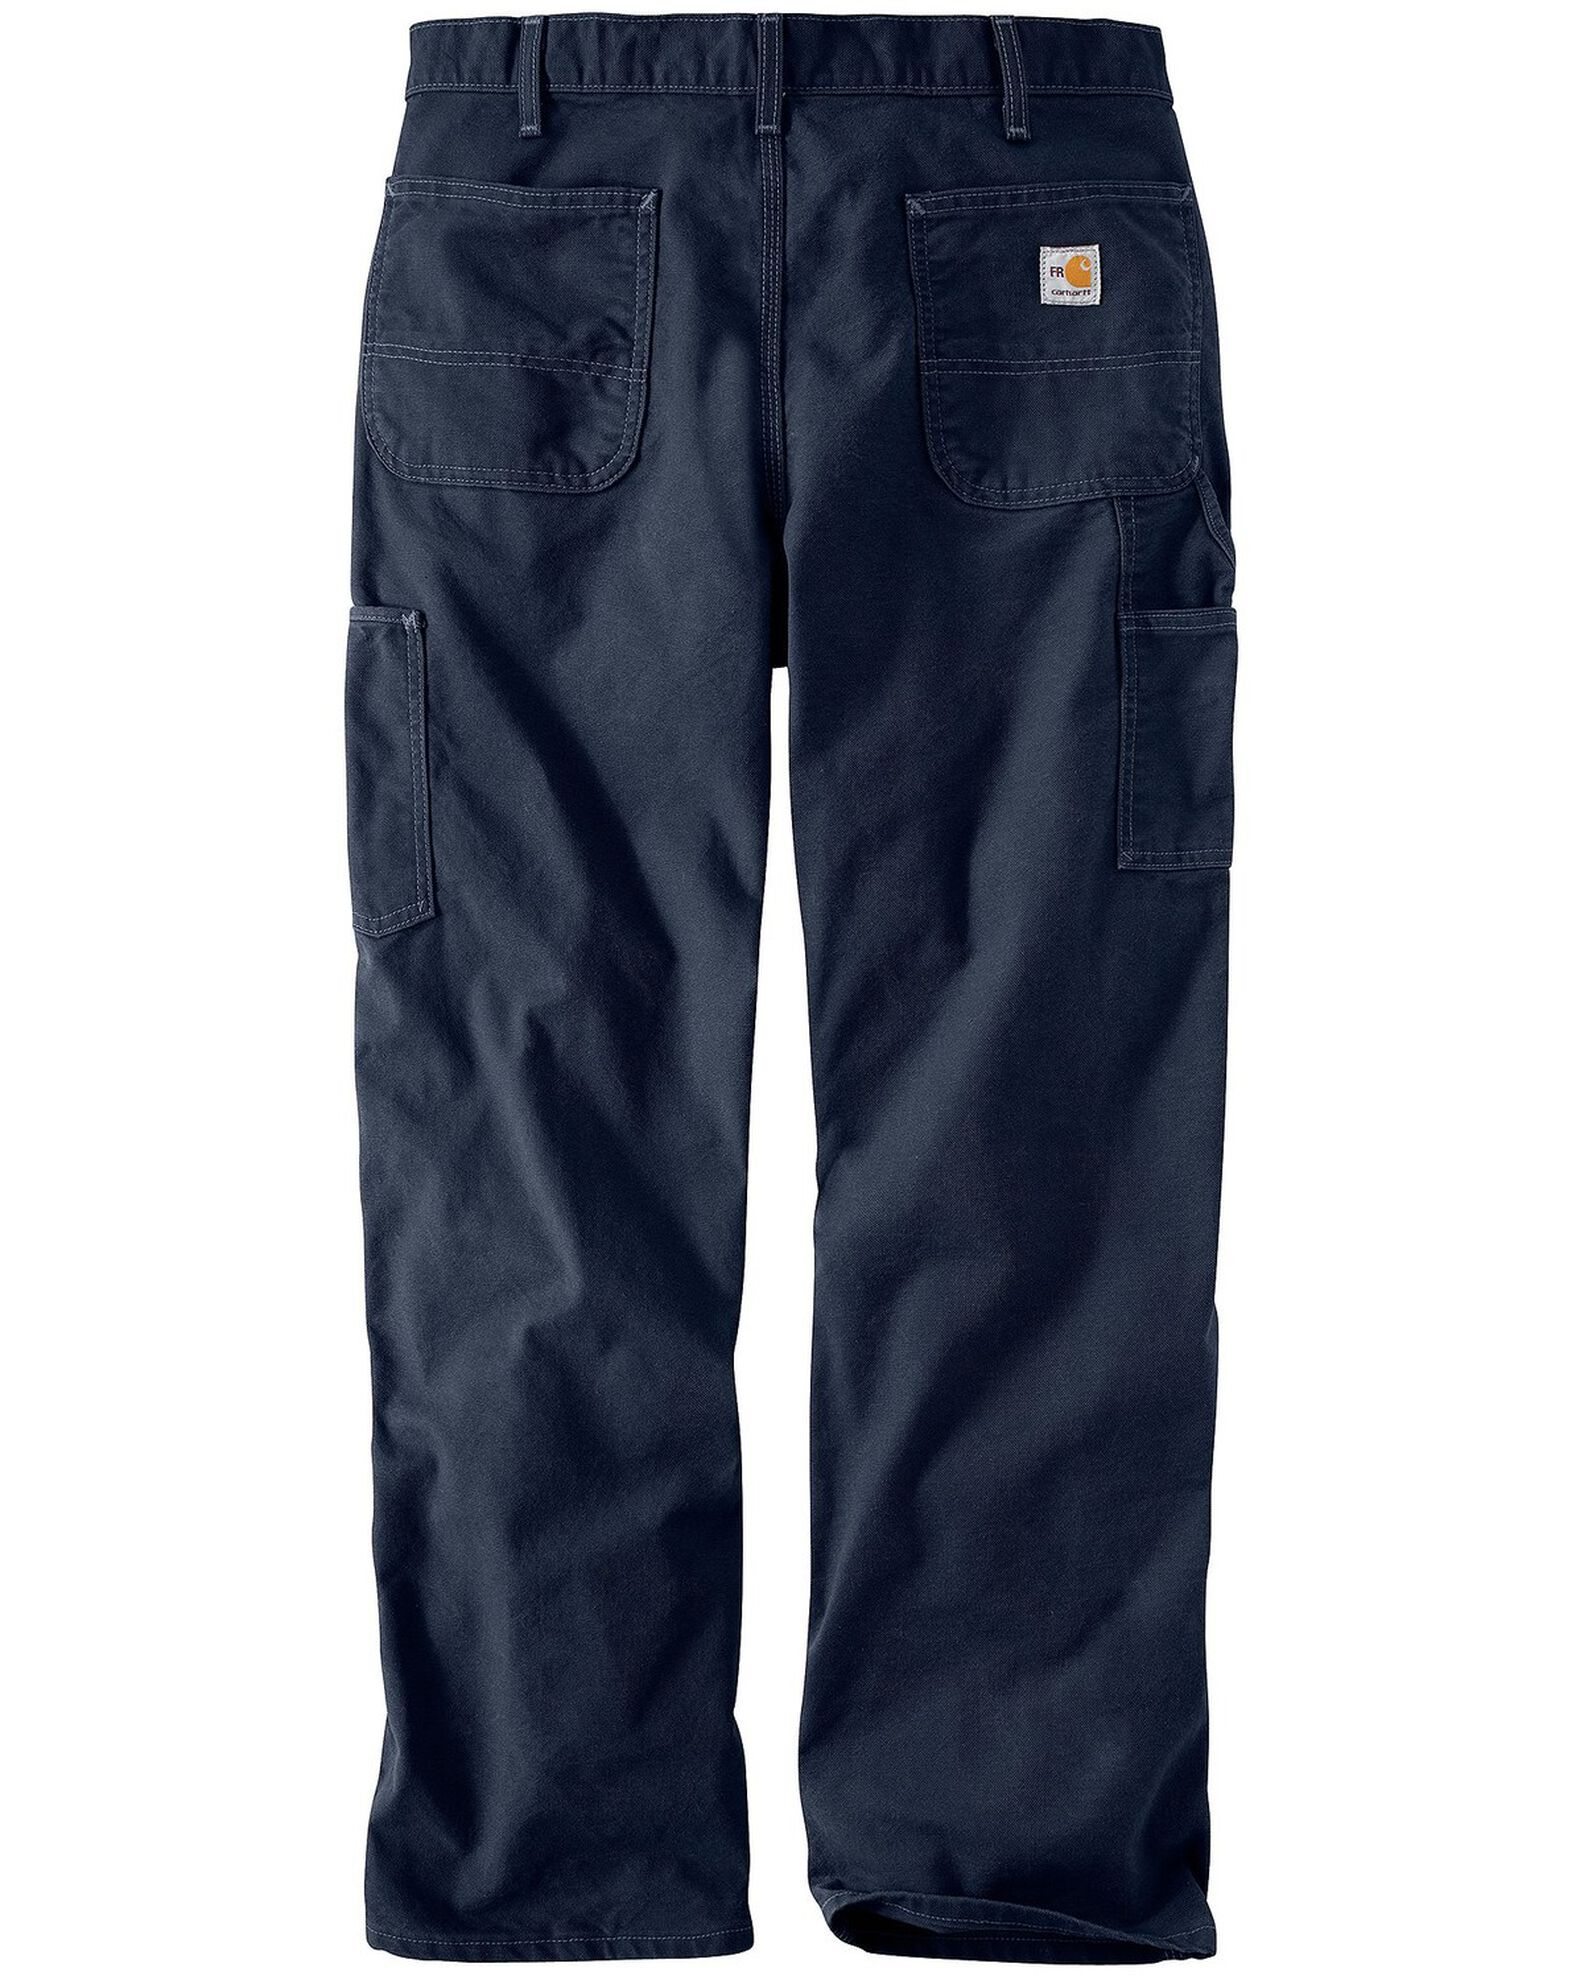 Carhartt Men's FR Washed Duck Work Pants - Country Outfitter